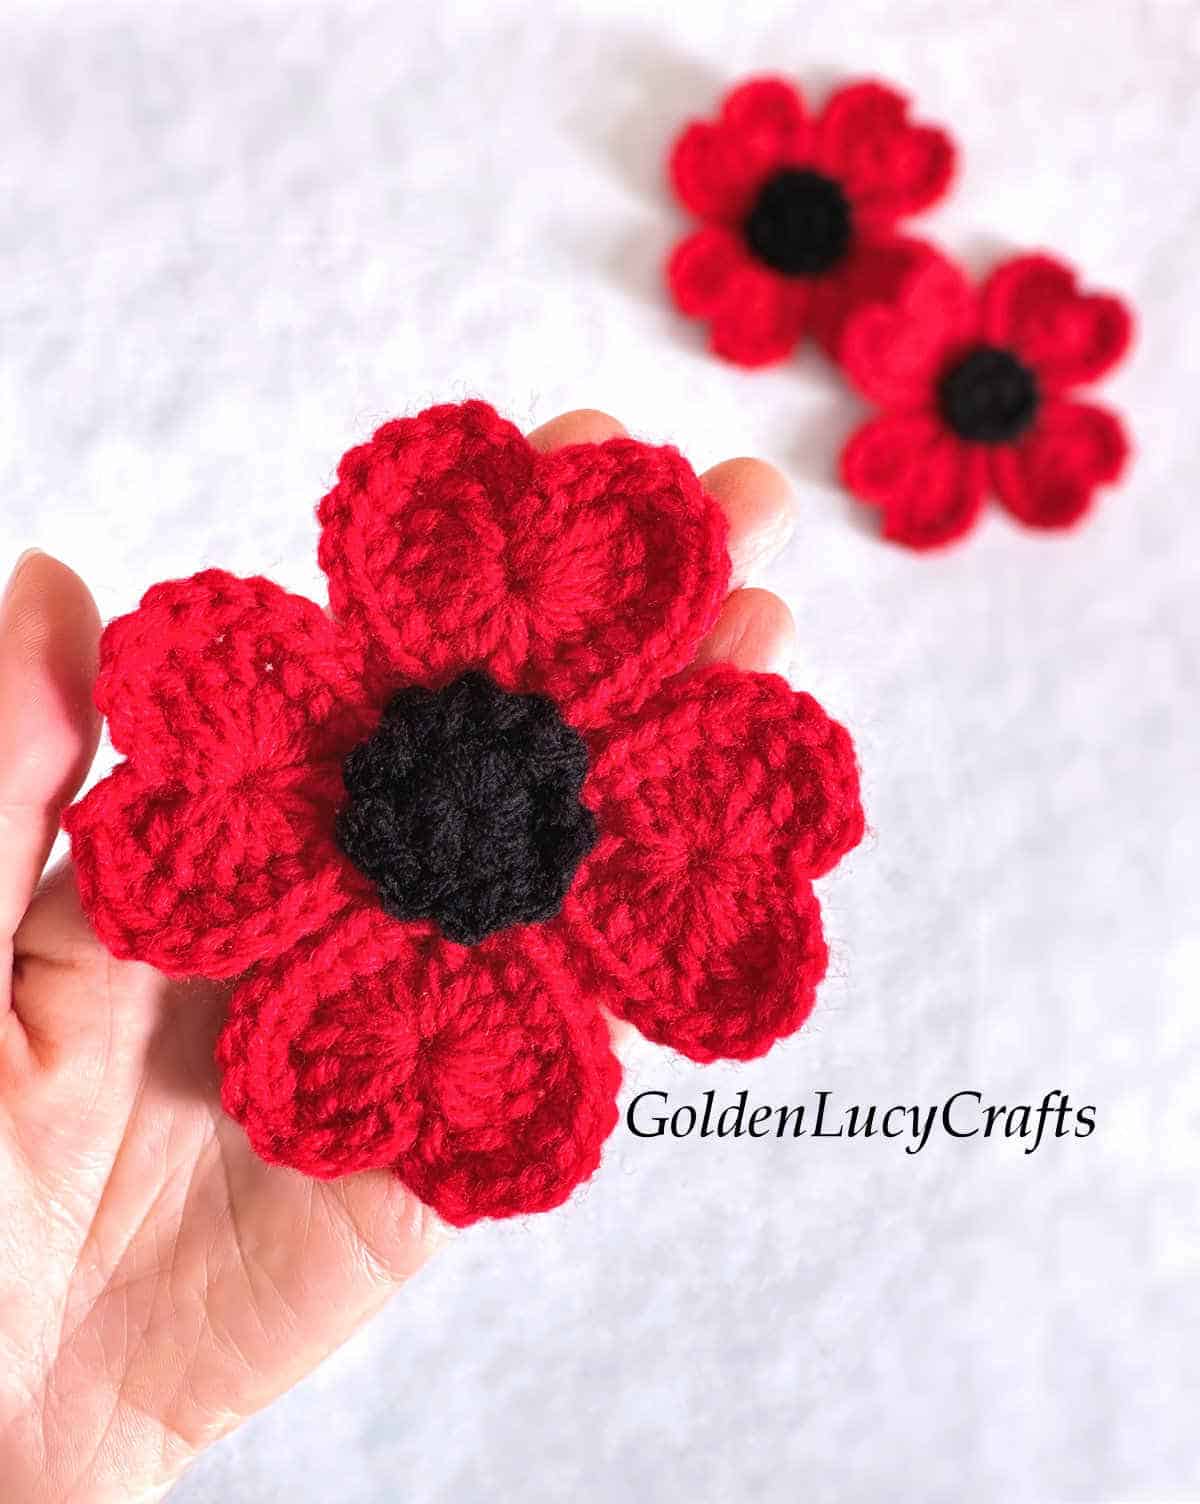 Crochet red poppy flower in the palm of a hand.